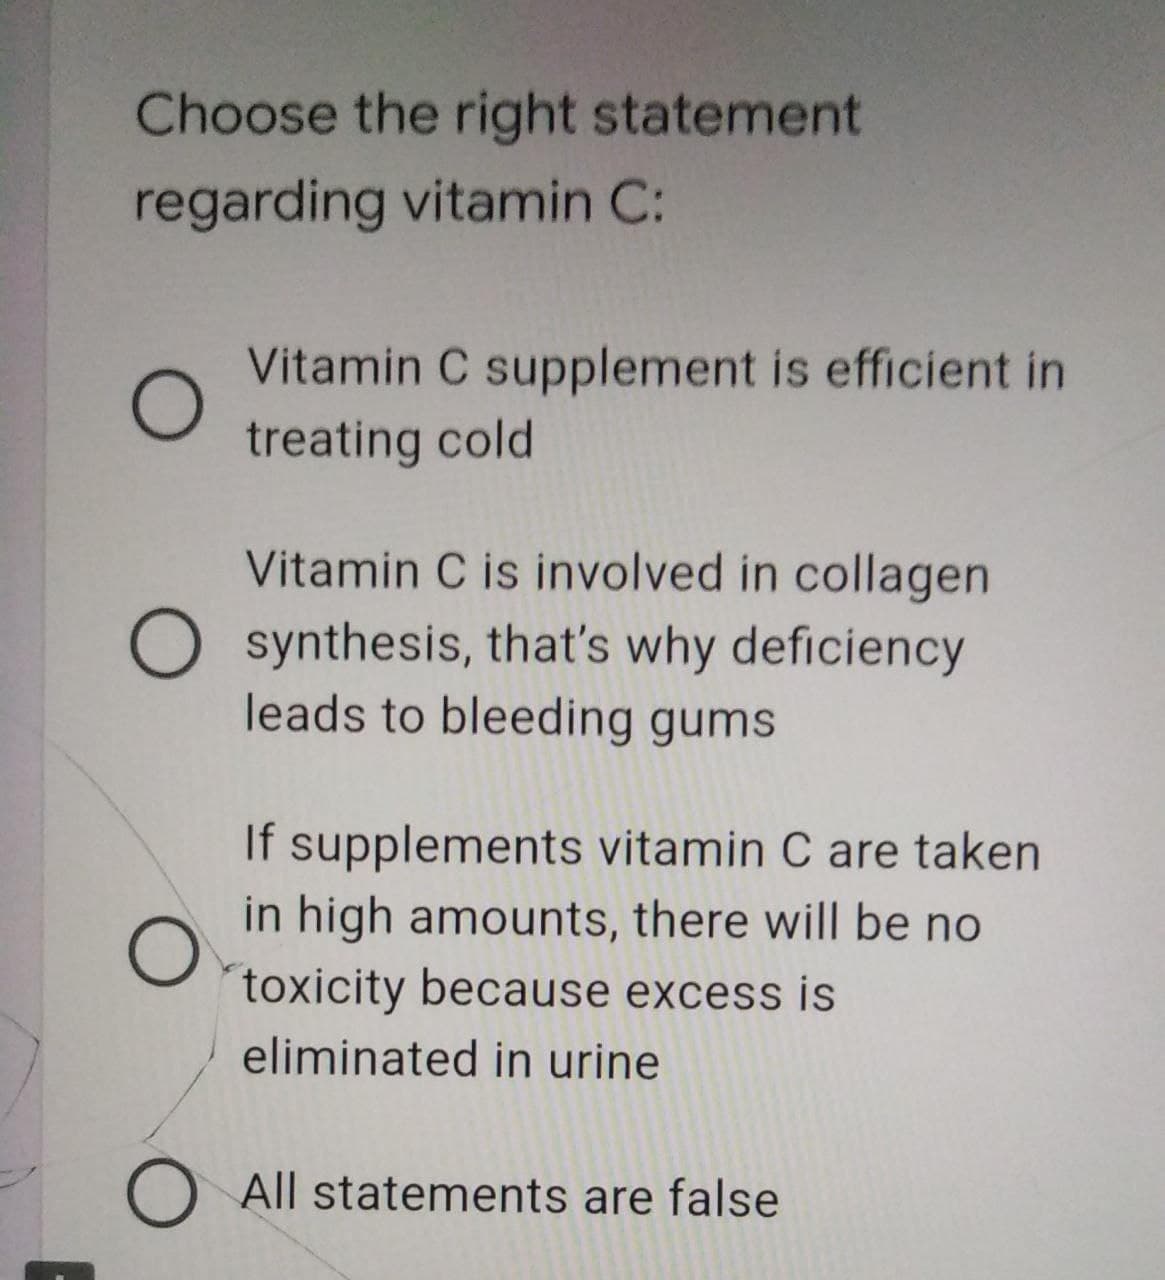 Choose the right statement
regarding vitamin C:
Vitamin C supplement is efficient in
treating cold
Vitamin C is involved in collagen
synthesis, that's why deficiency
leads to bleeding gums
If supplements vitamin C are taken
in high amounts, there will be no
toxicity because excess is
eliminated in urine
All statements are false
